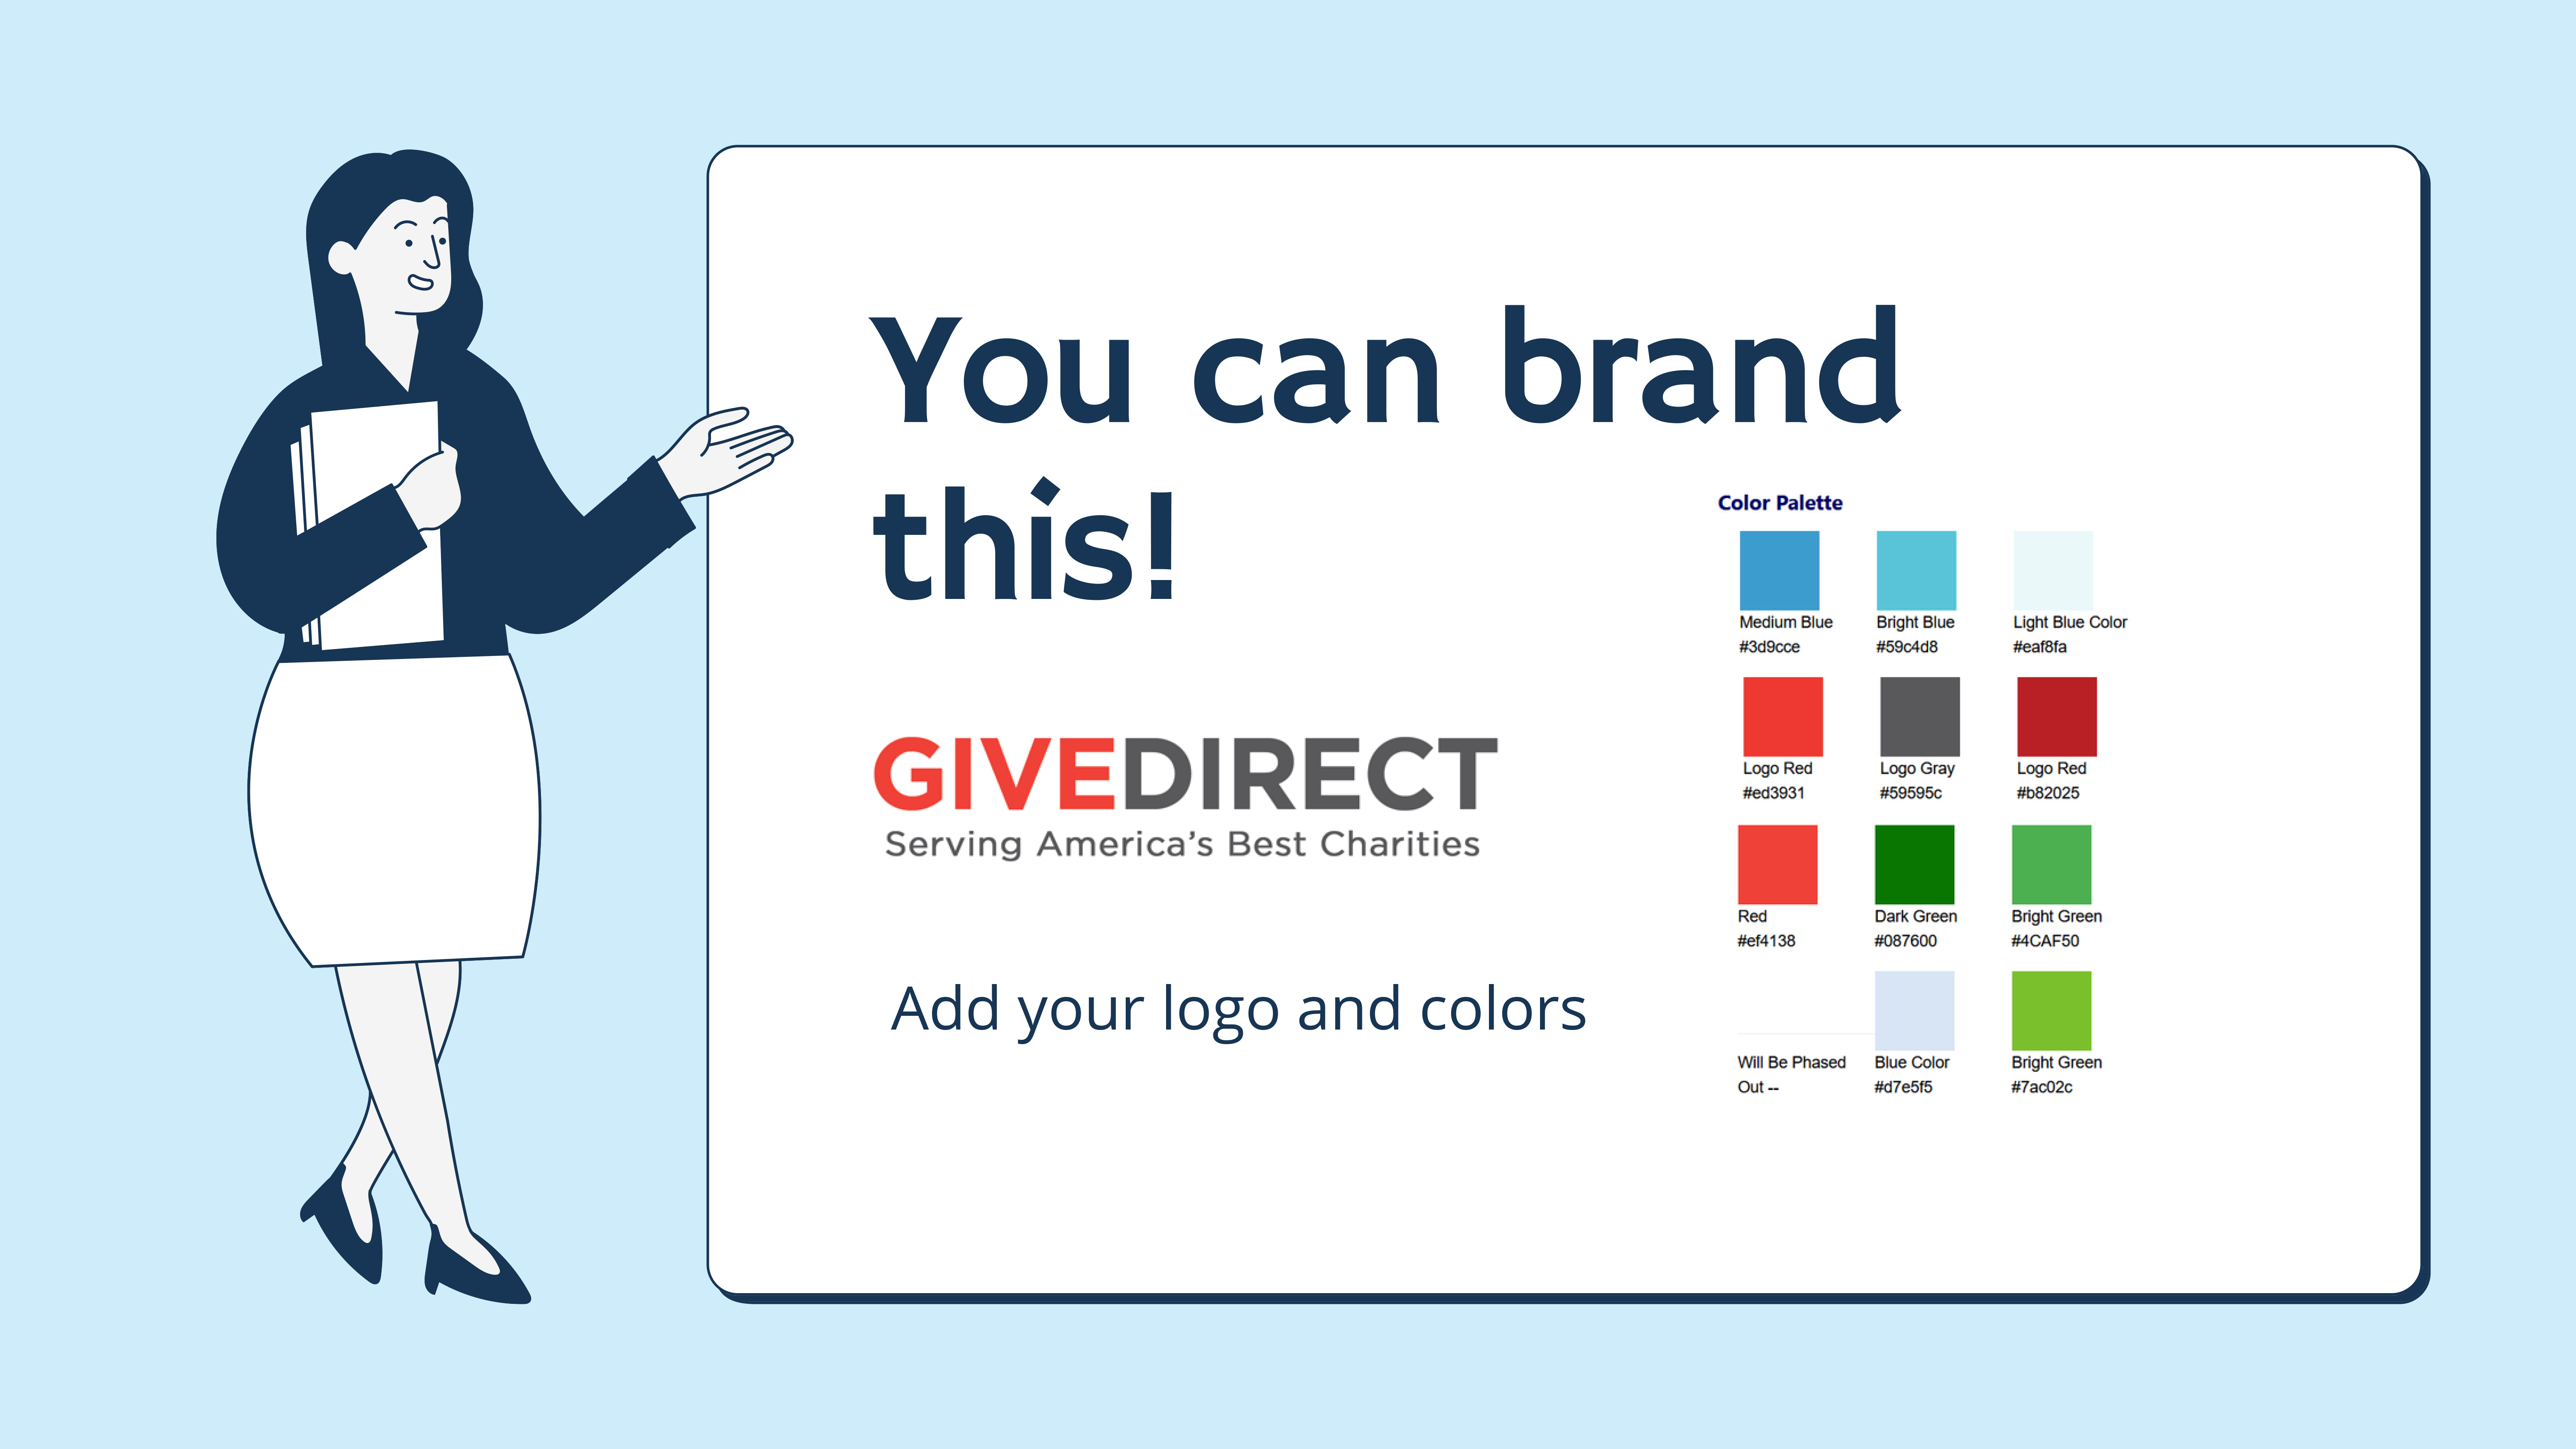 add your logo and colors